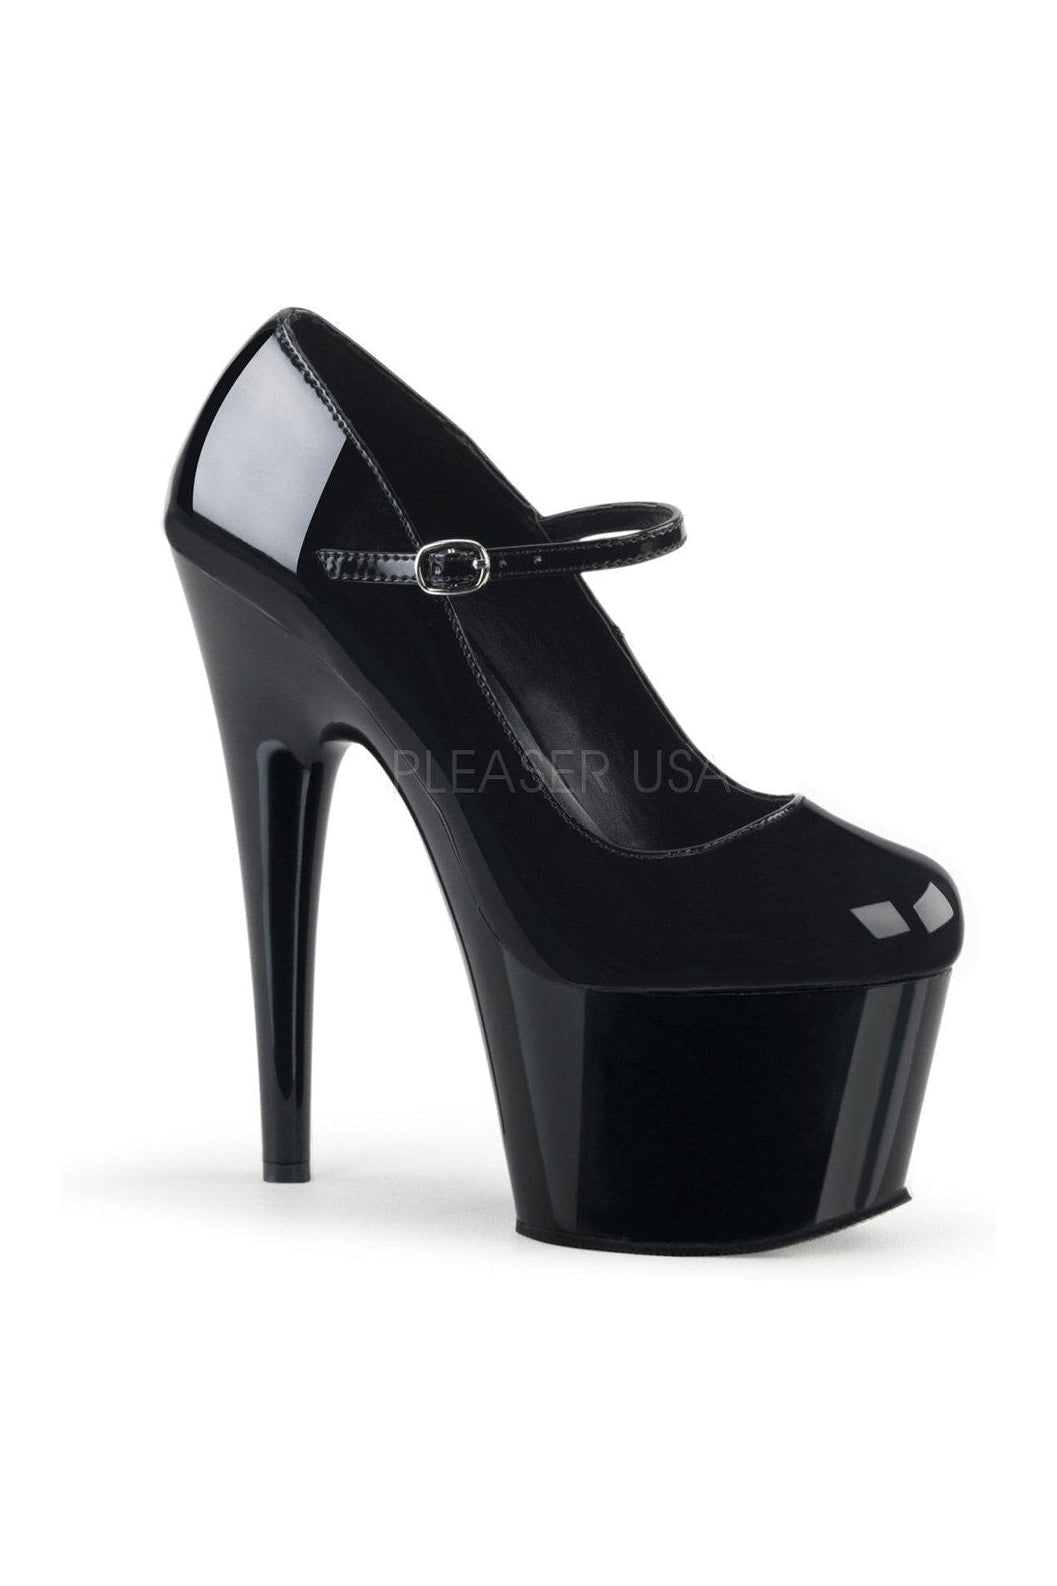 Pleaser Black Mary Janes Platform Stripper Shoes | Buy at Sexyshoes.com